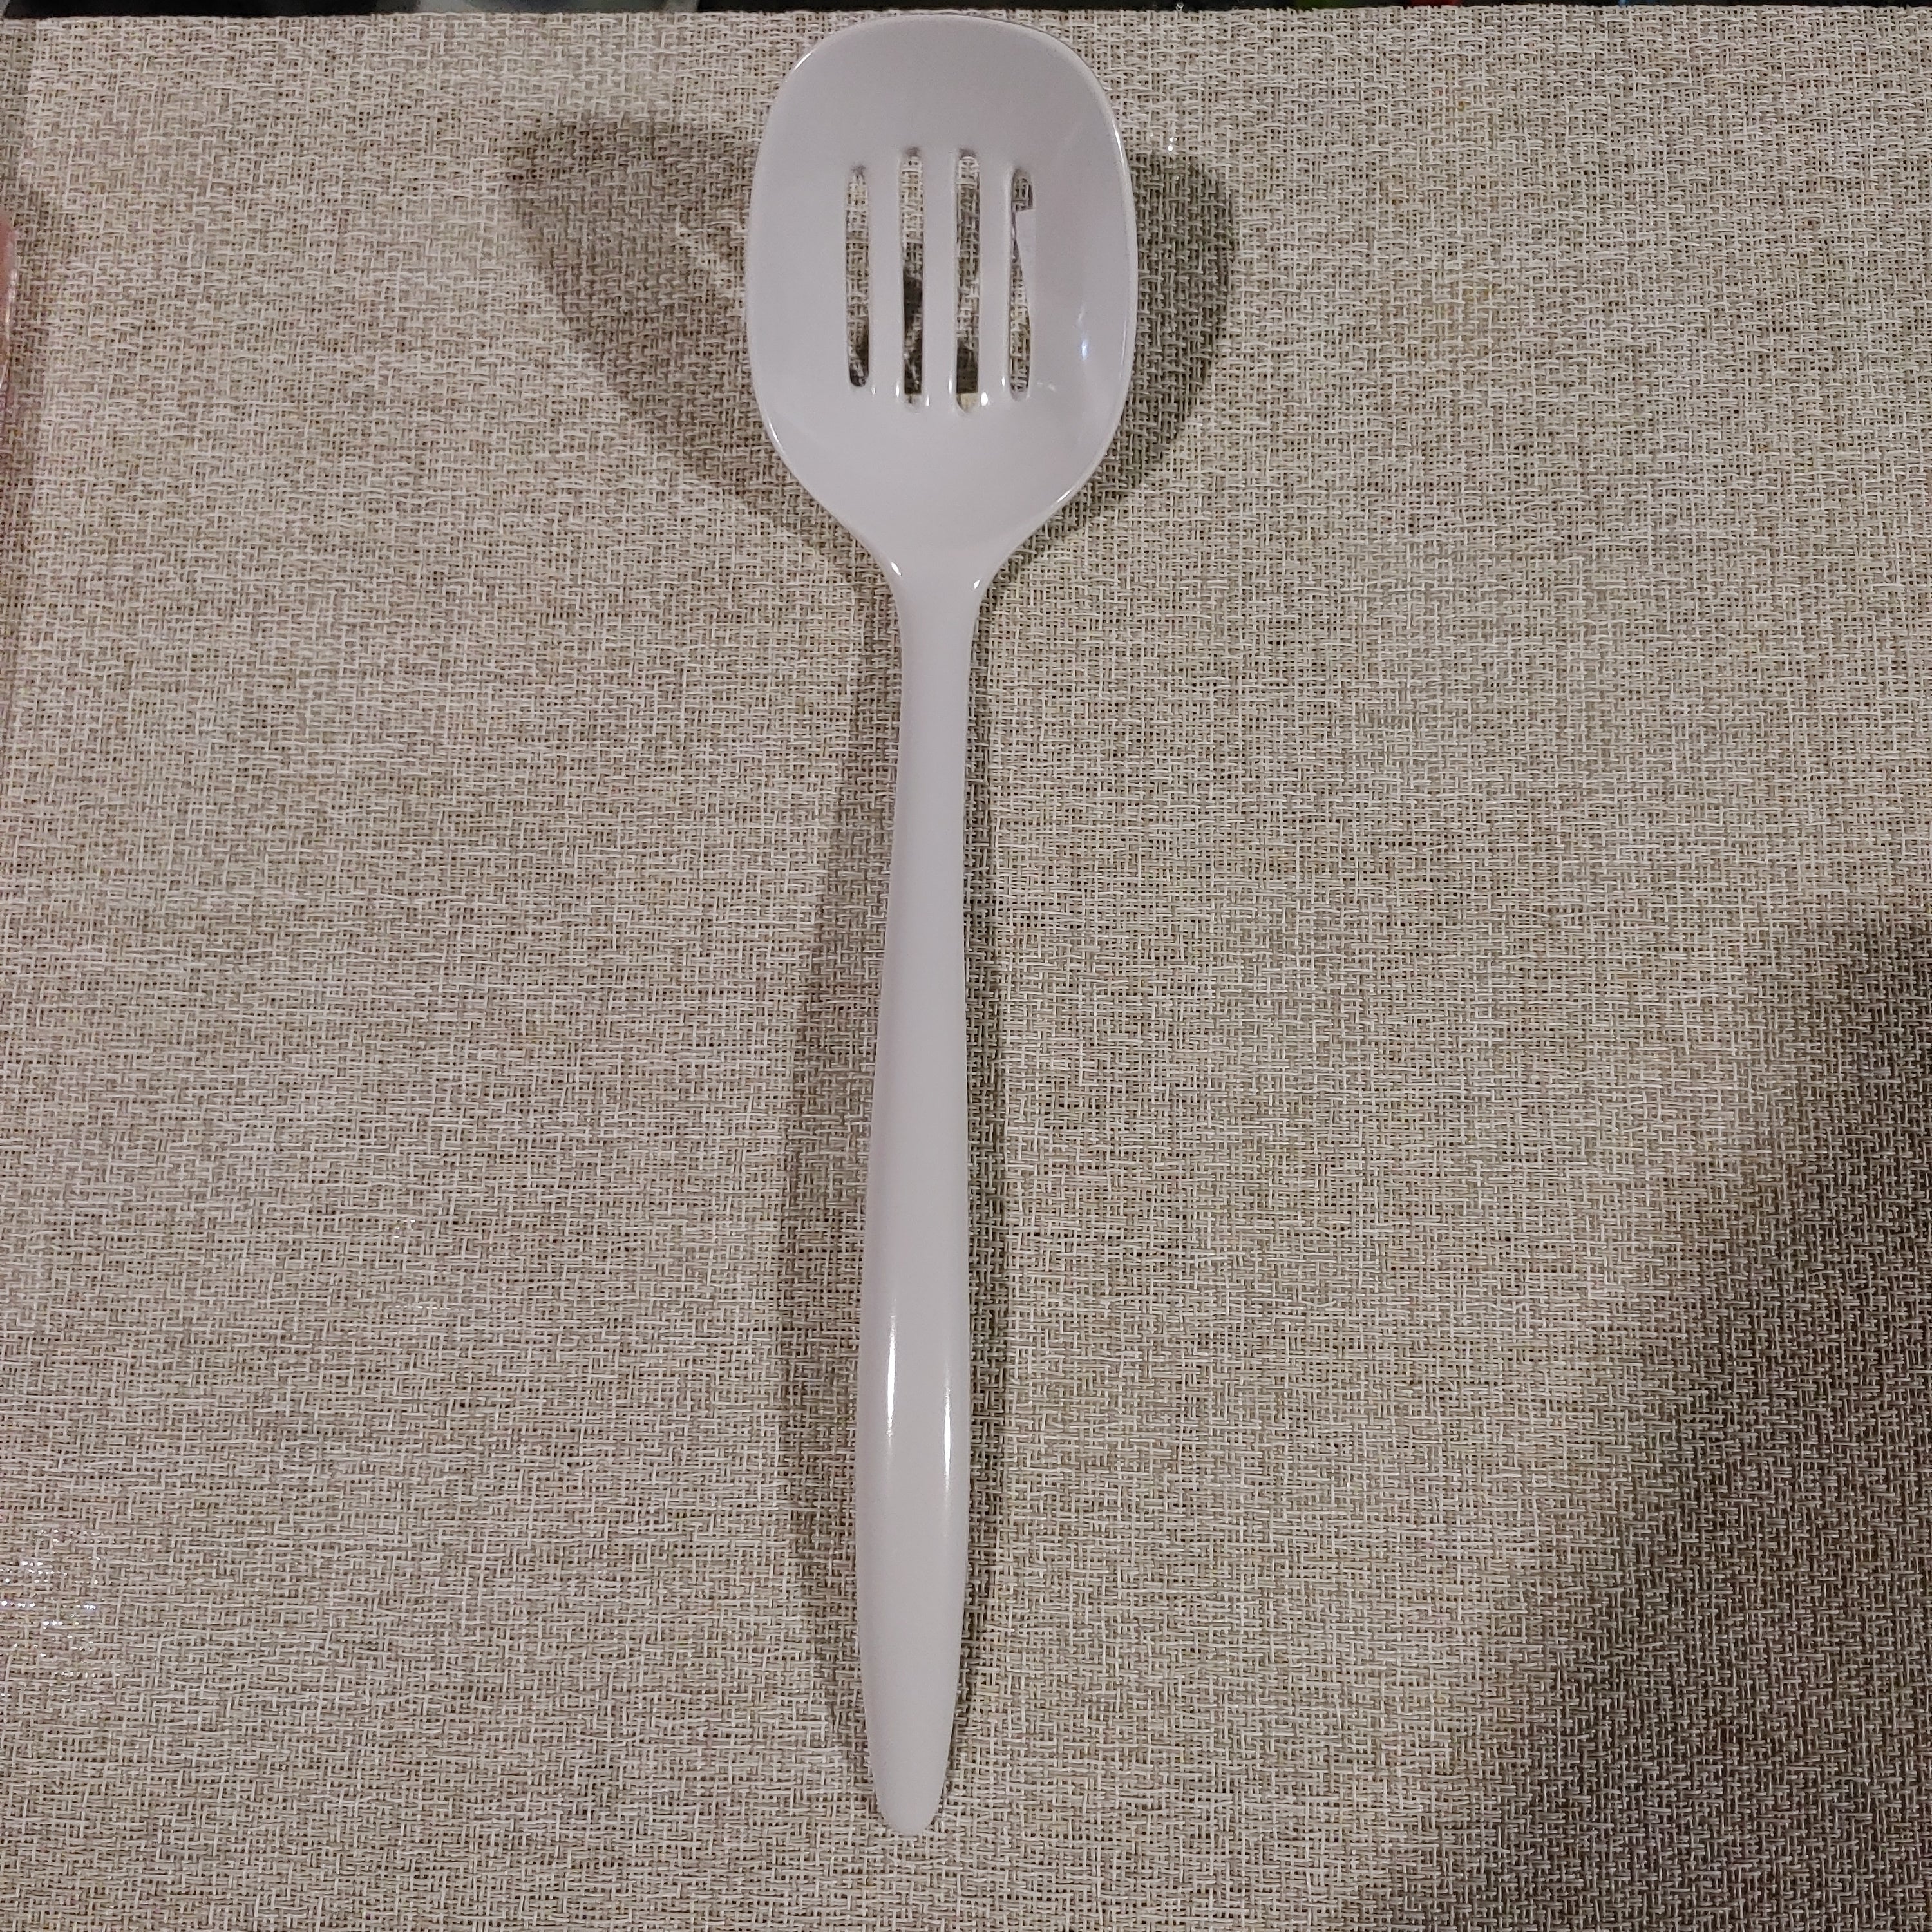 Slotted Spoon 29.5cm/11.6"